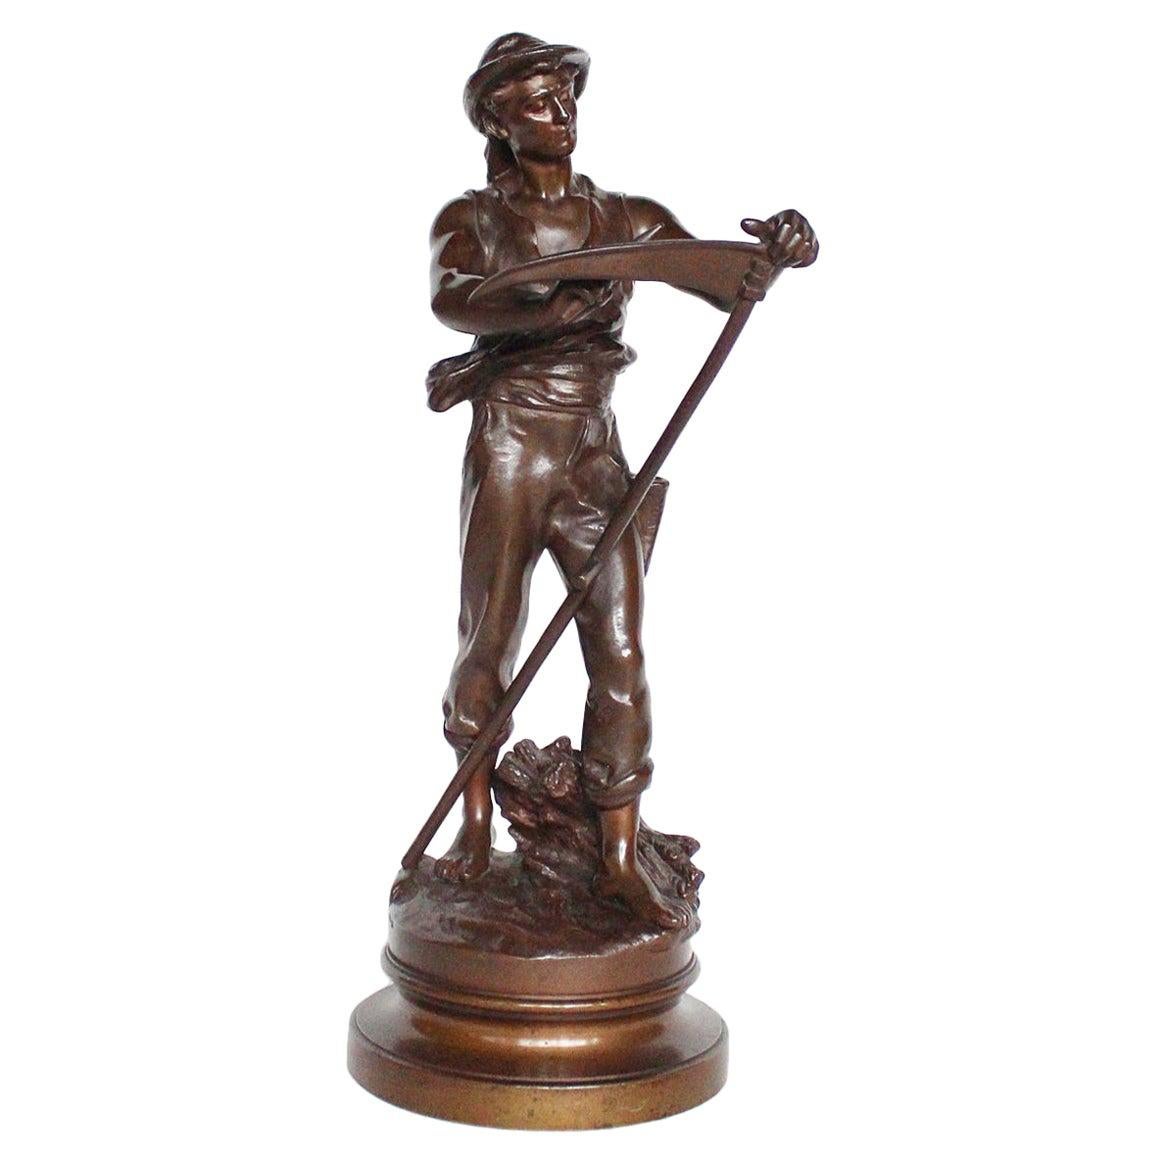 Art Nouveau Bronze Sculpture by Mathurin Moreau Signed and Stamped, circa 1890